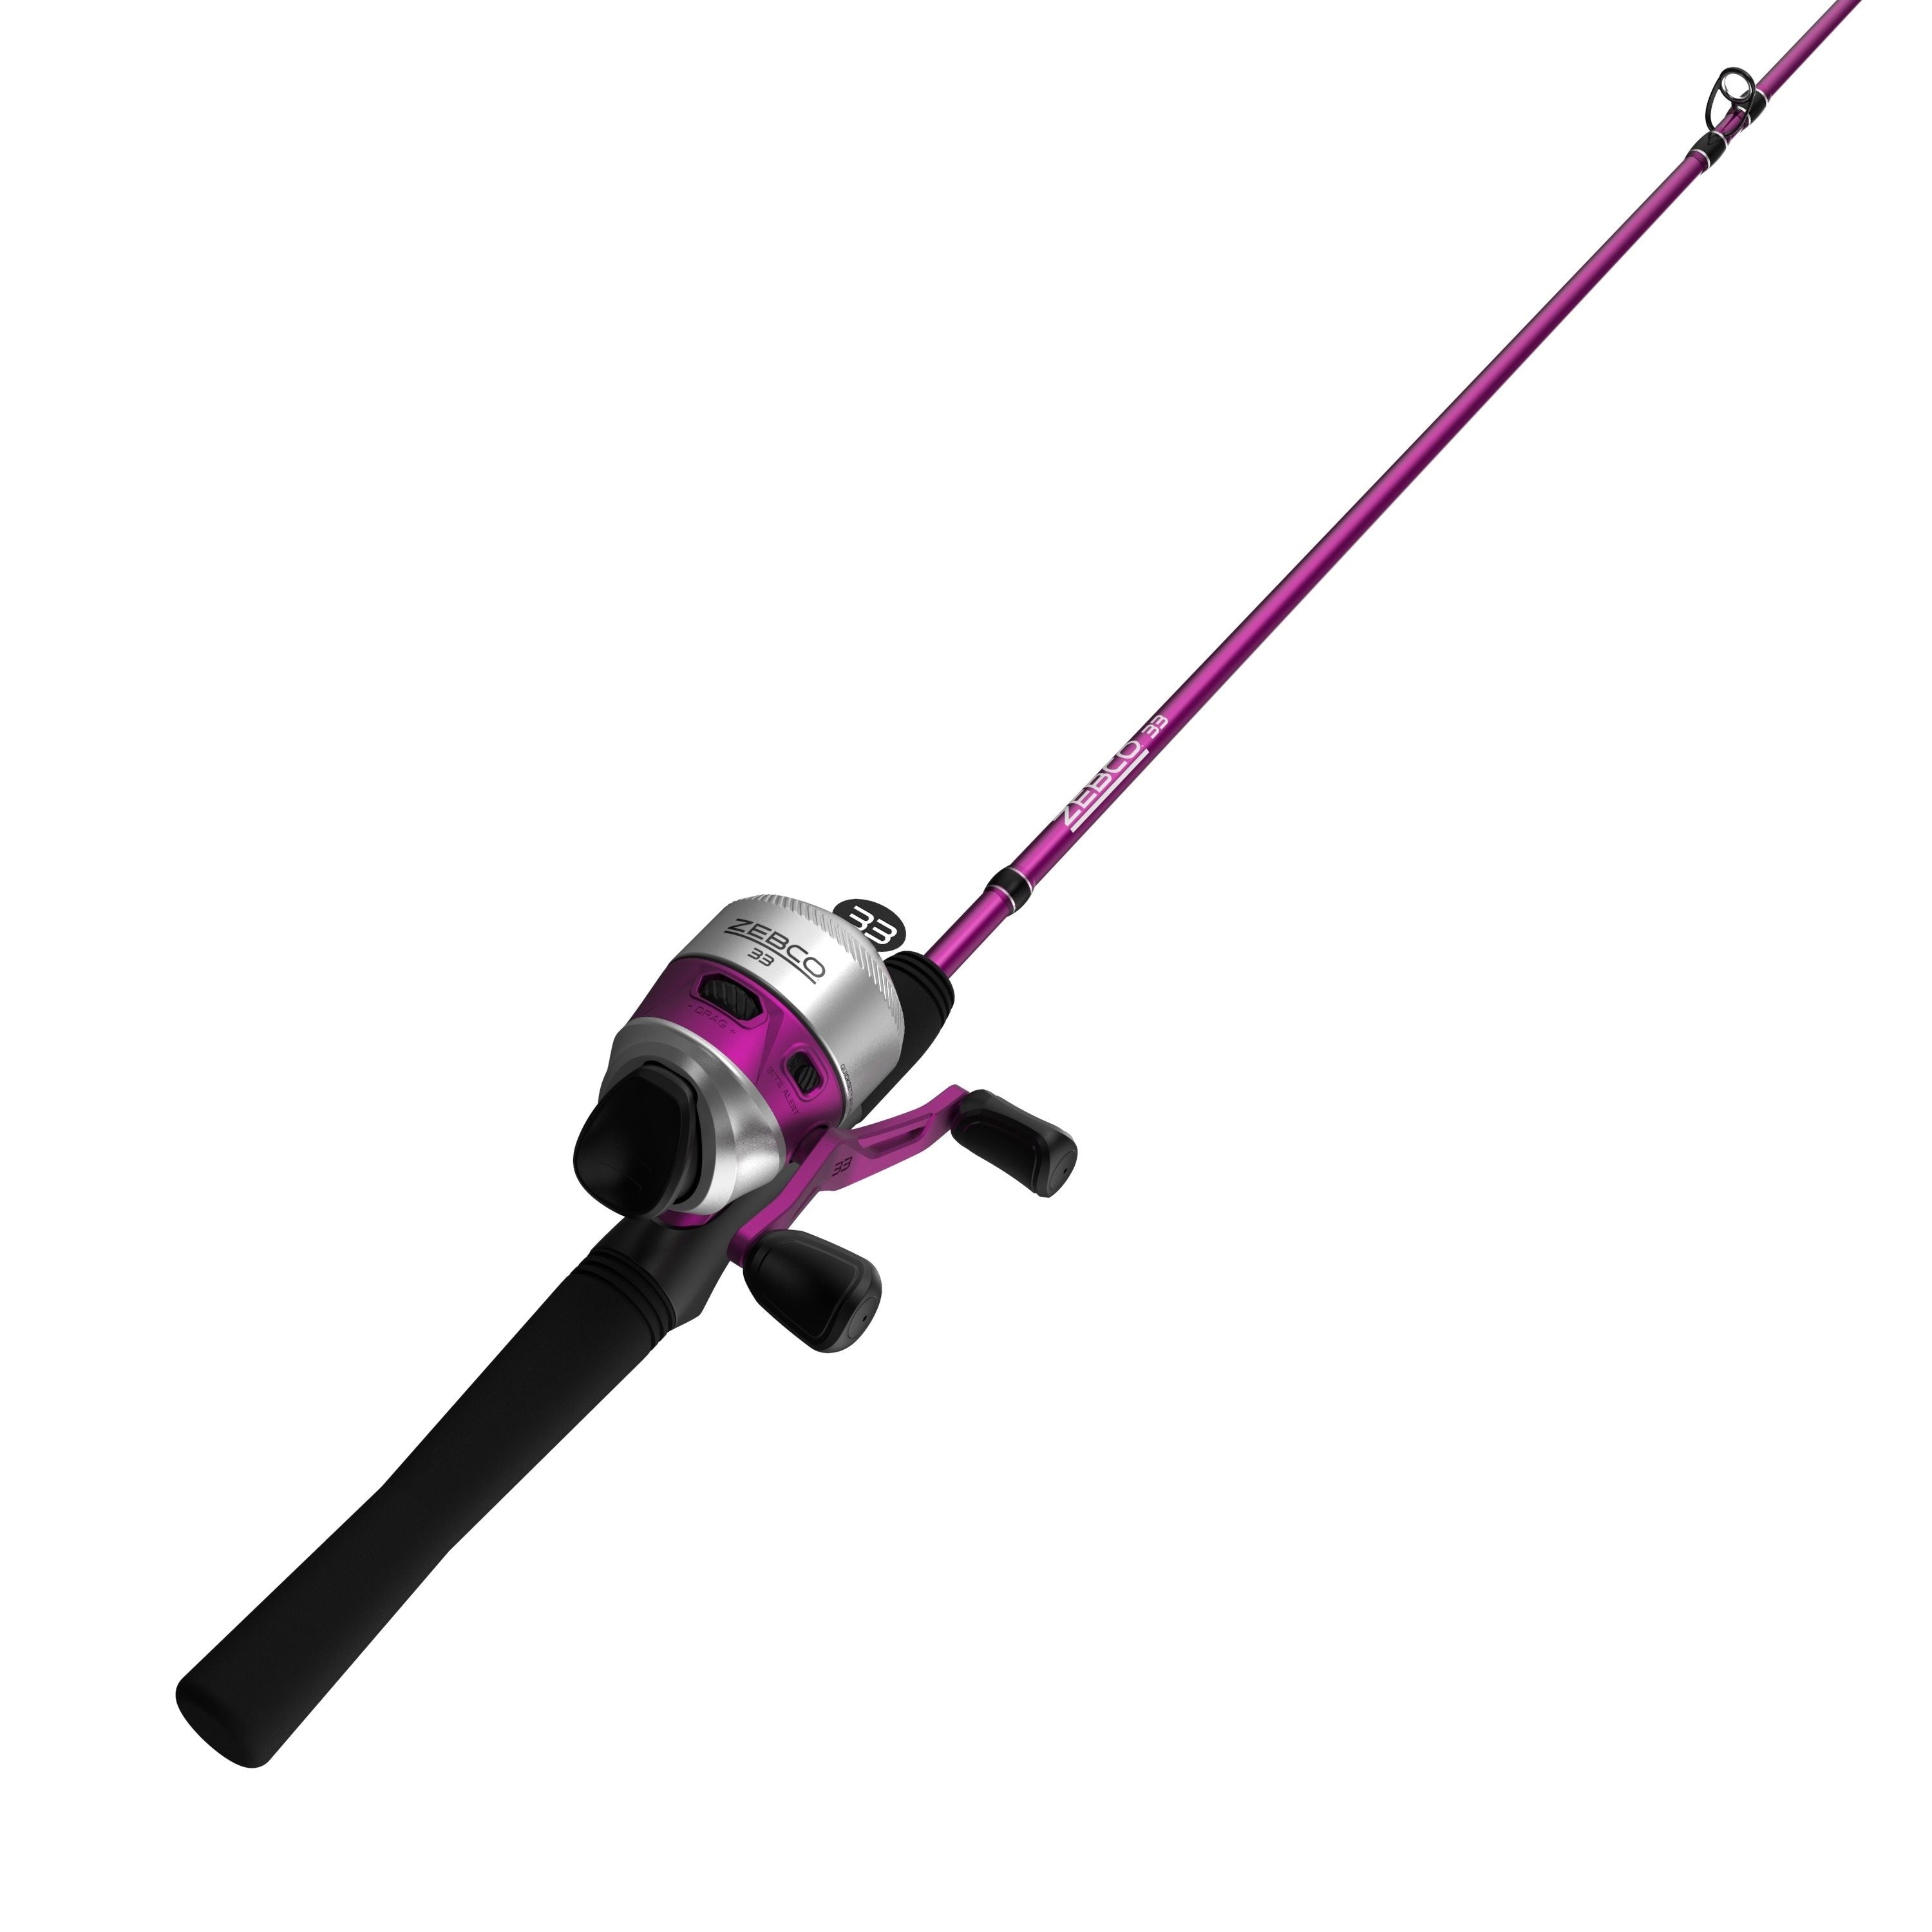 "33 Spincast" Spinning combo - Pink